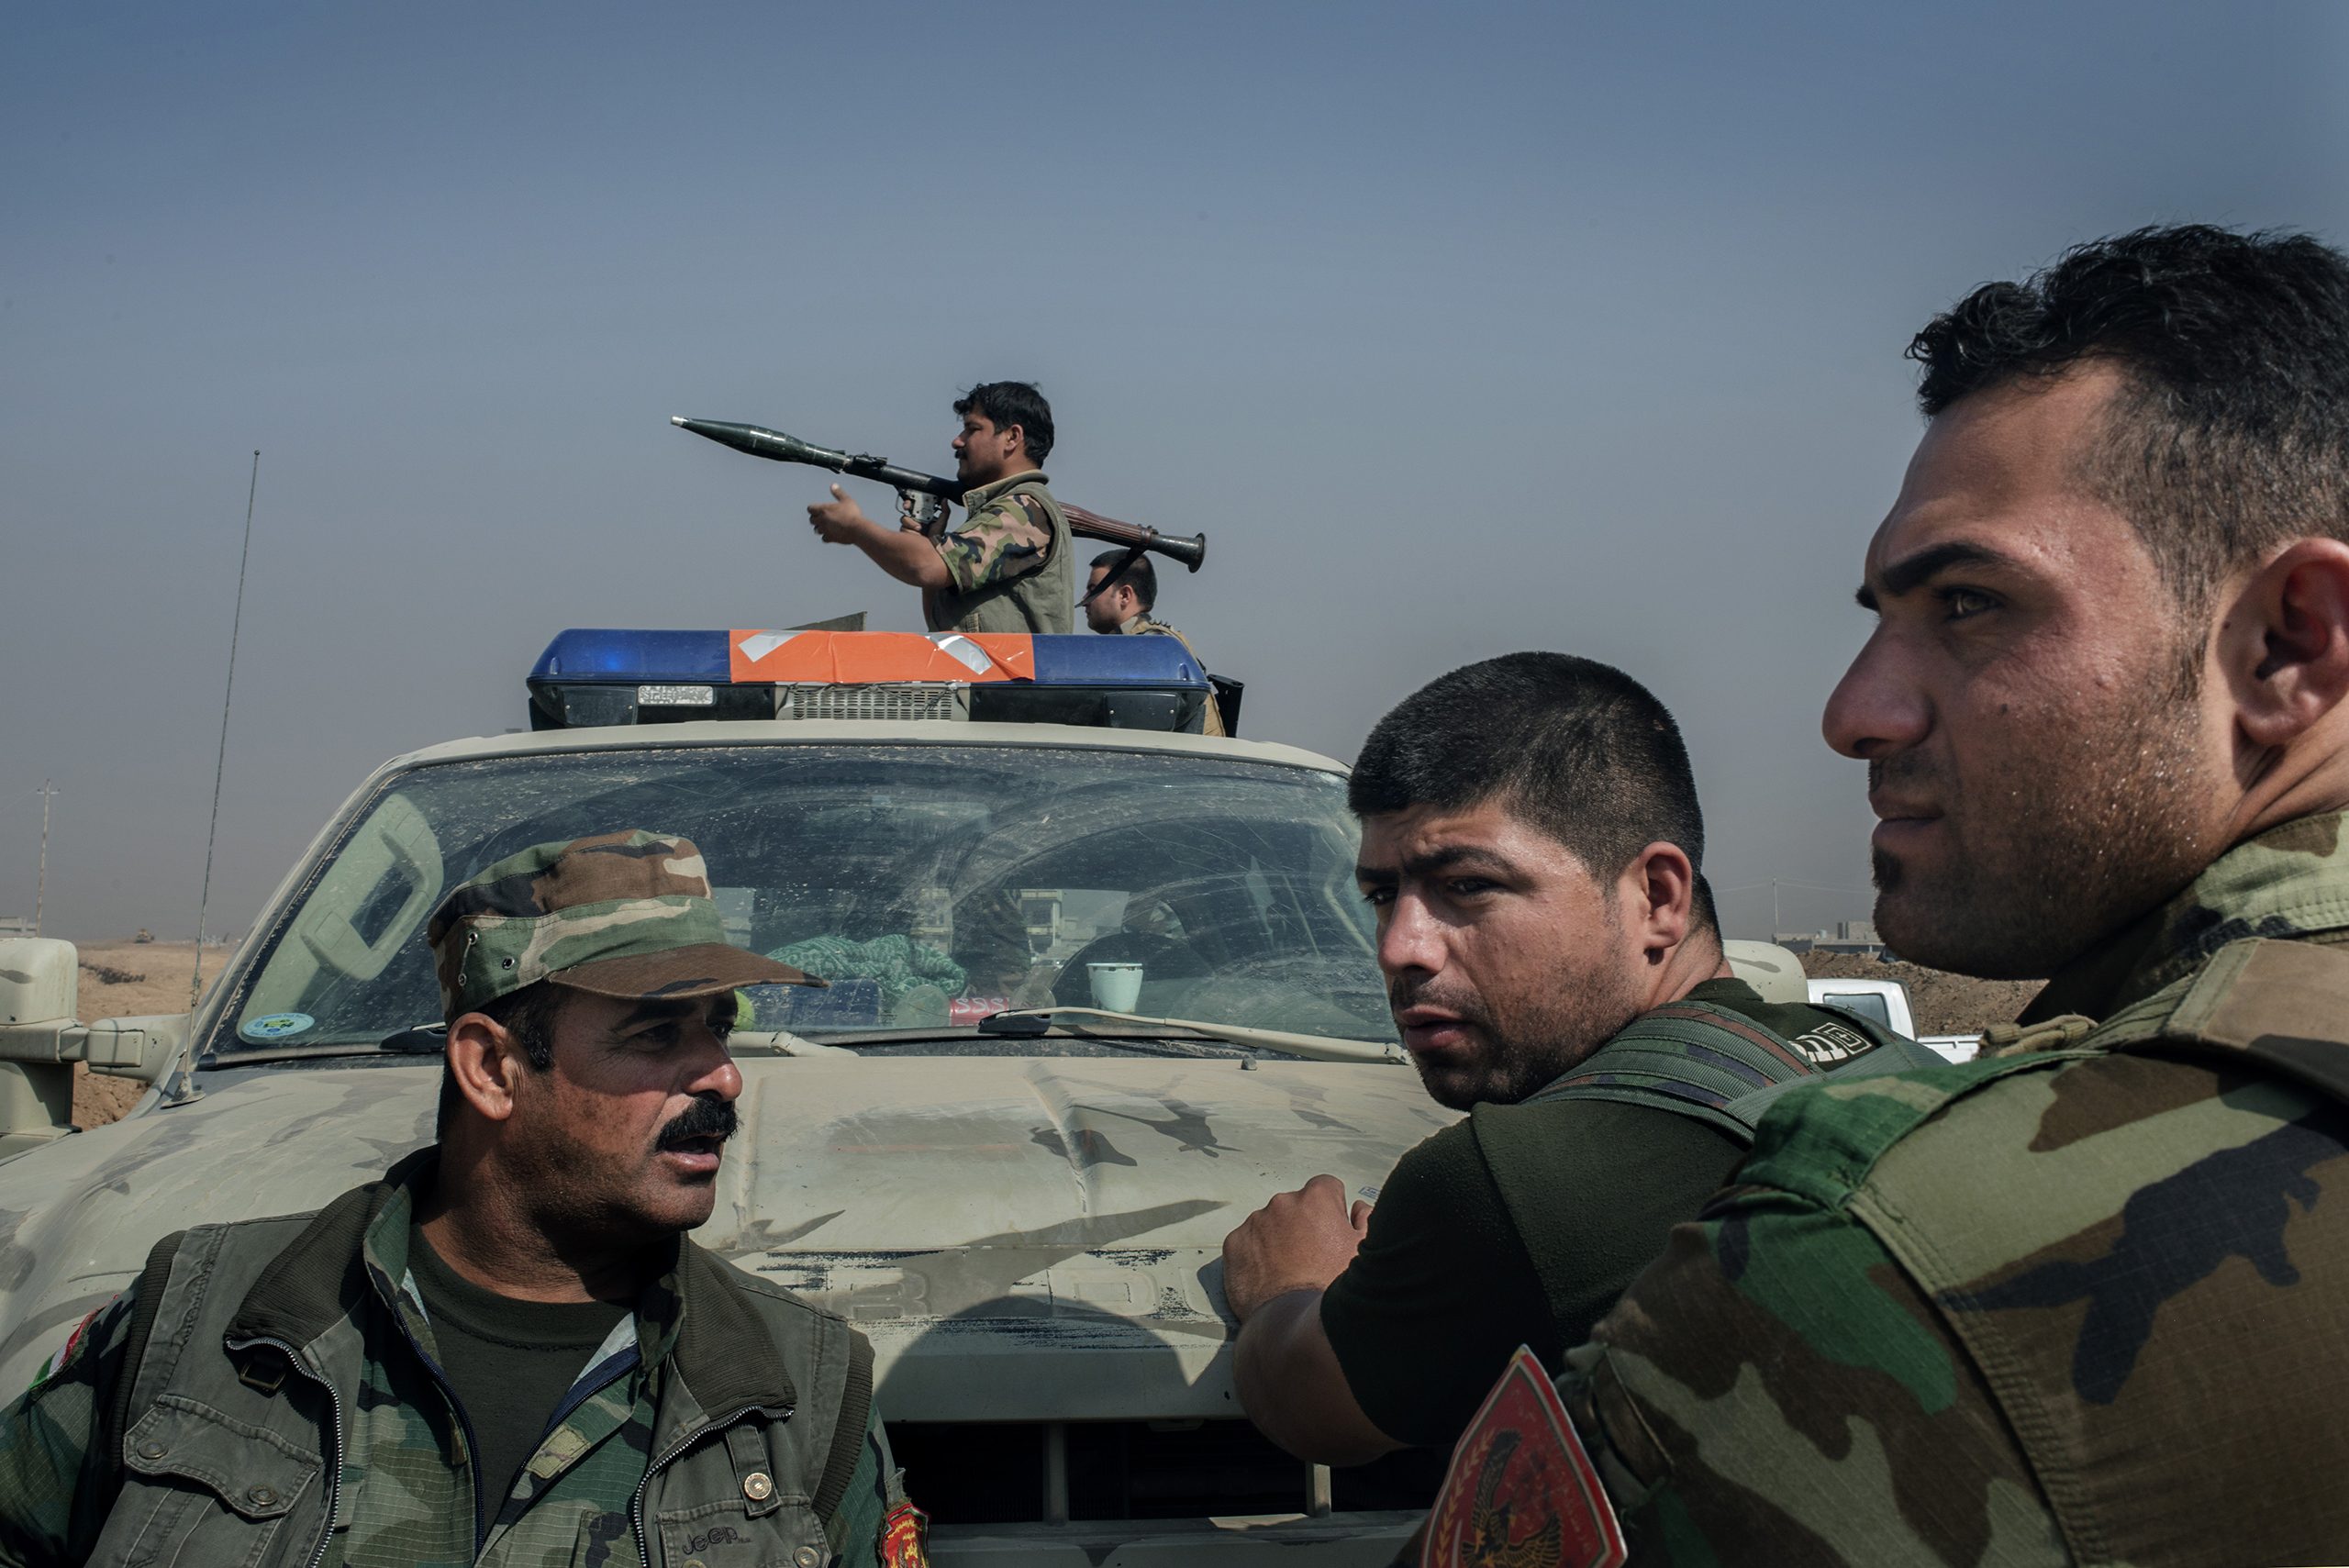 Kurdish fighters near the Bartella front during the operation led by Iraqi forces to retake Mosul from ISIS.